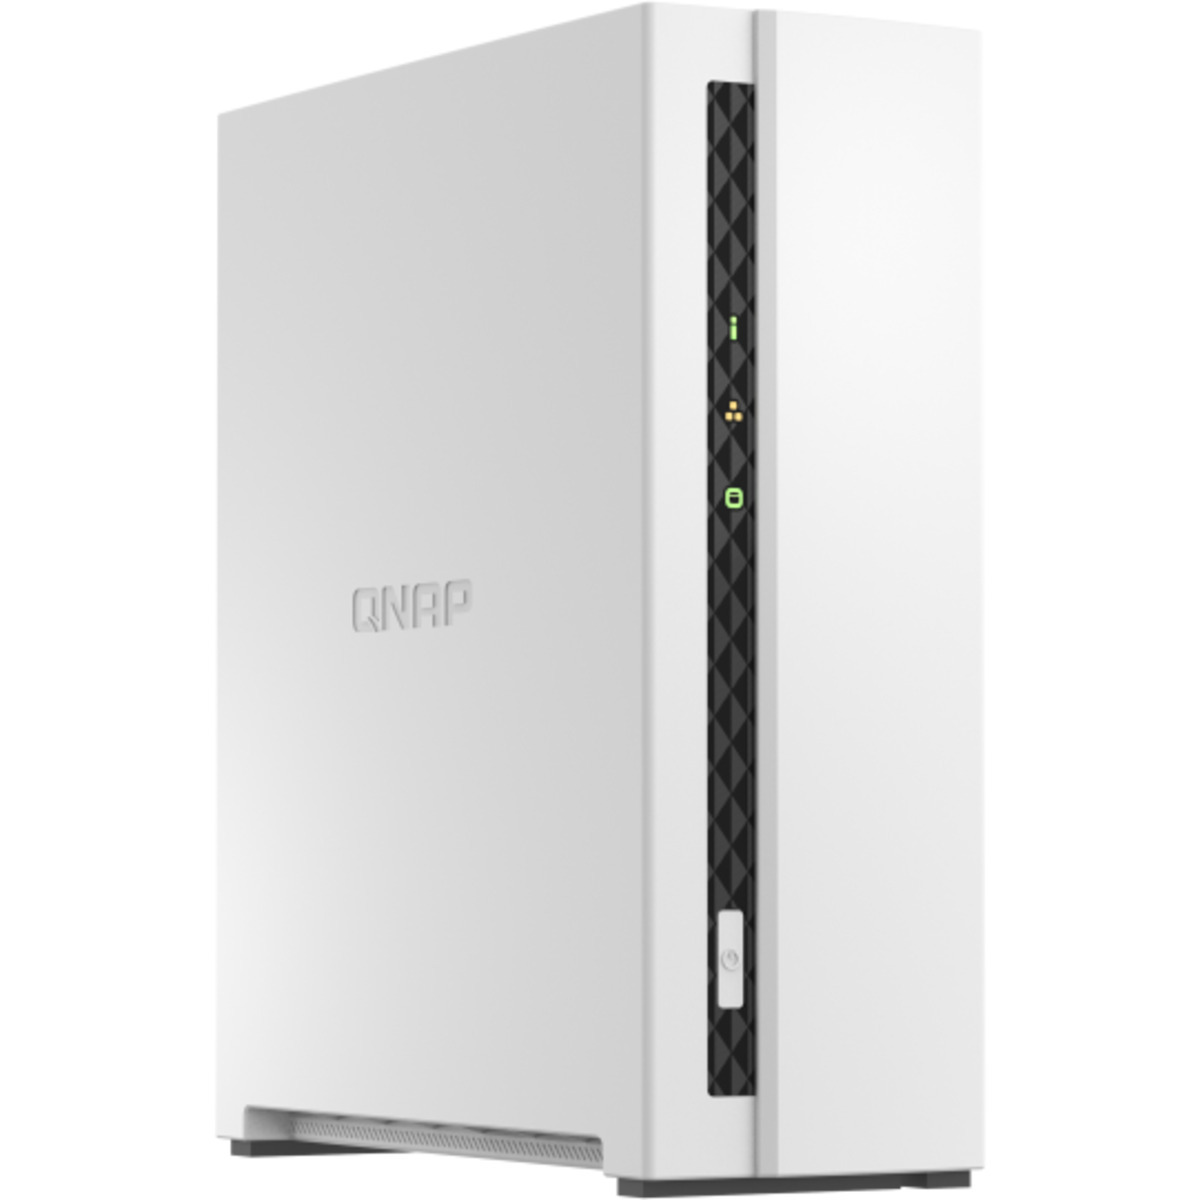 QNAP TS-133 24tb 1-Bay Desktop Personal / Basic Home / Small Office NAS - Network Attached Storage Device 1x24tb Western Digital Ultrastar HC580 WUH722424ALE6L4 3.5 7200rpm SATA 6Gb/s HDD ENTERPRISE Class Drives Installed - Burn-In Tested TS-133